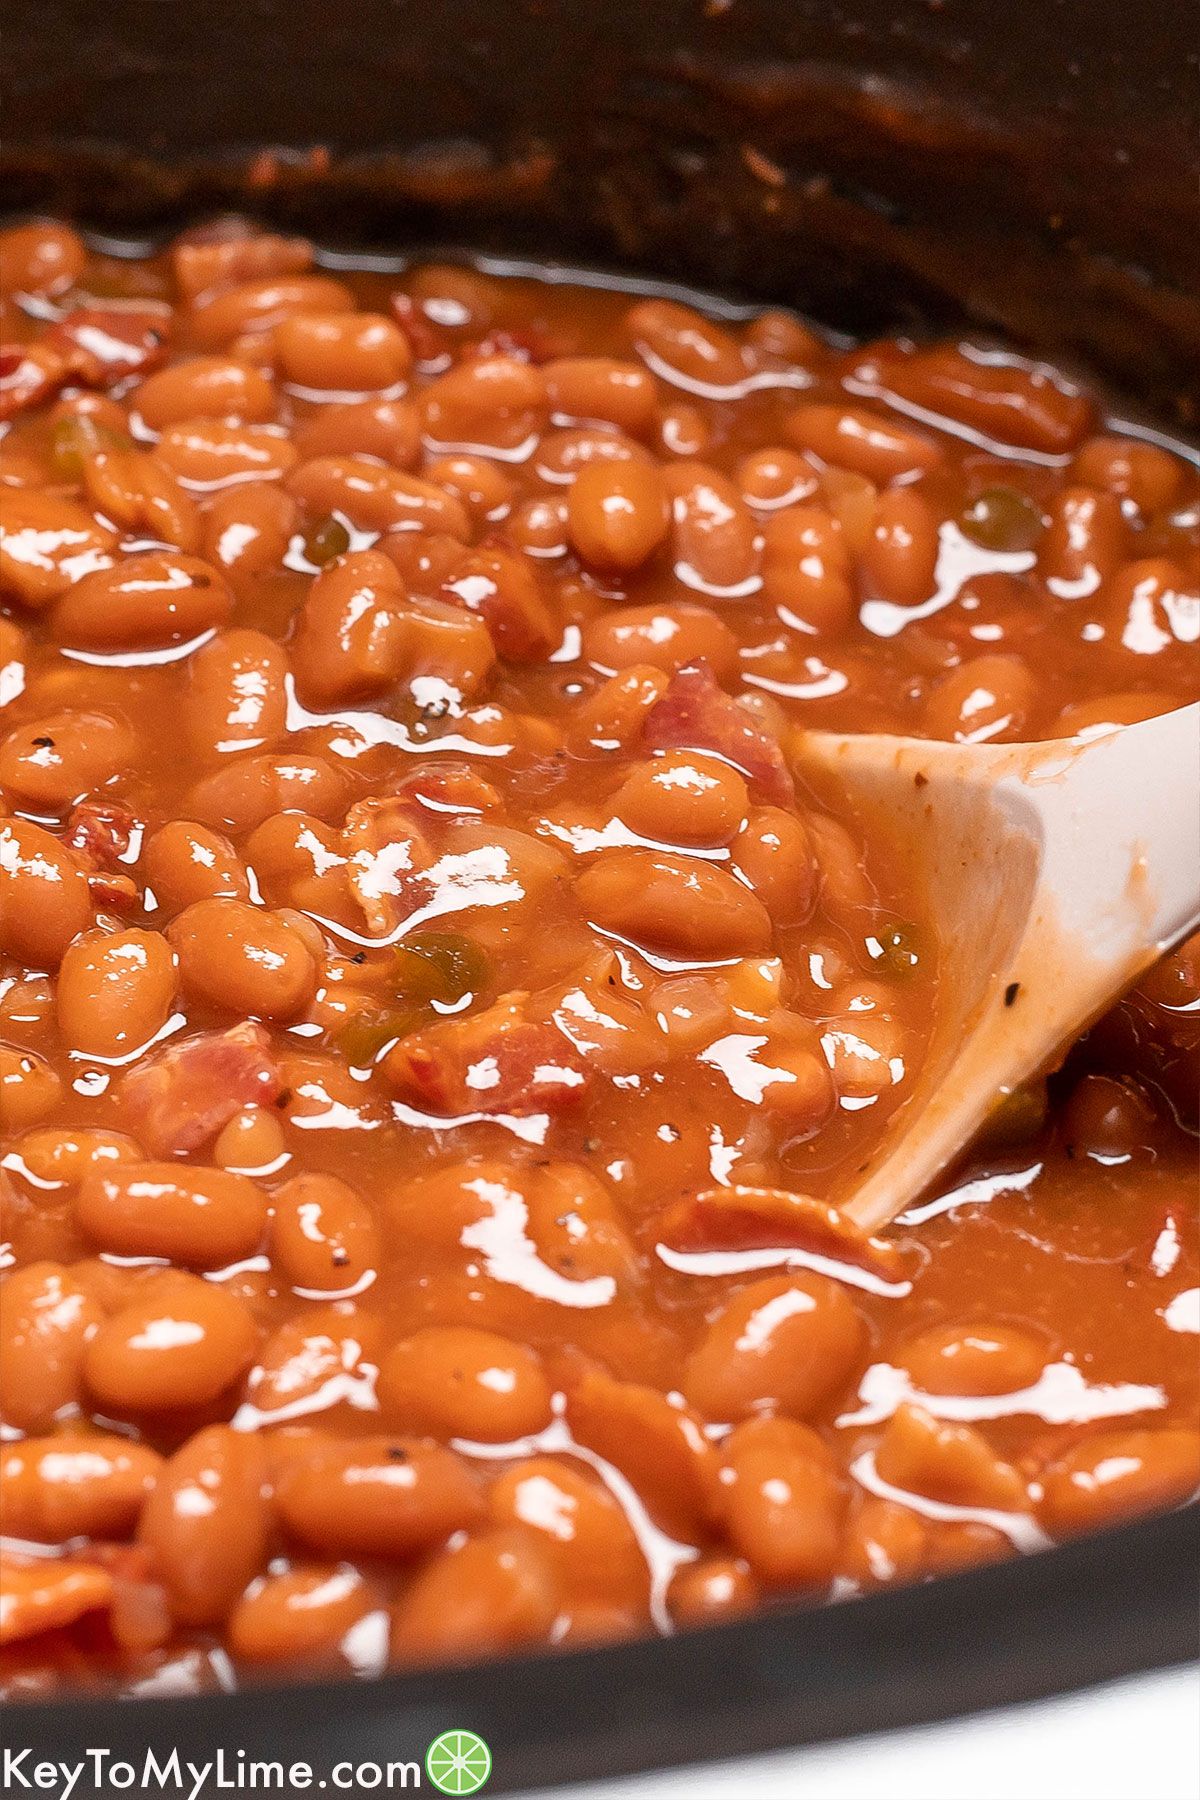 A close up image showing the texture of the baked beans.